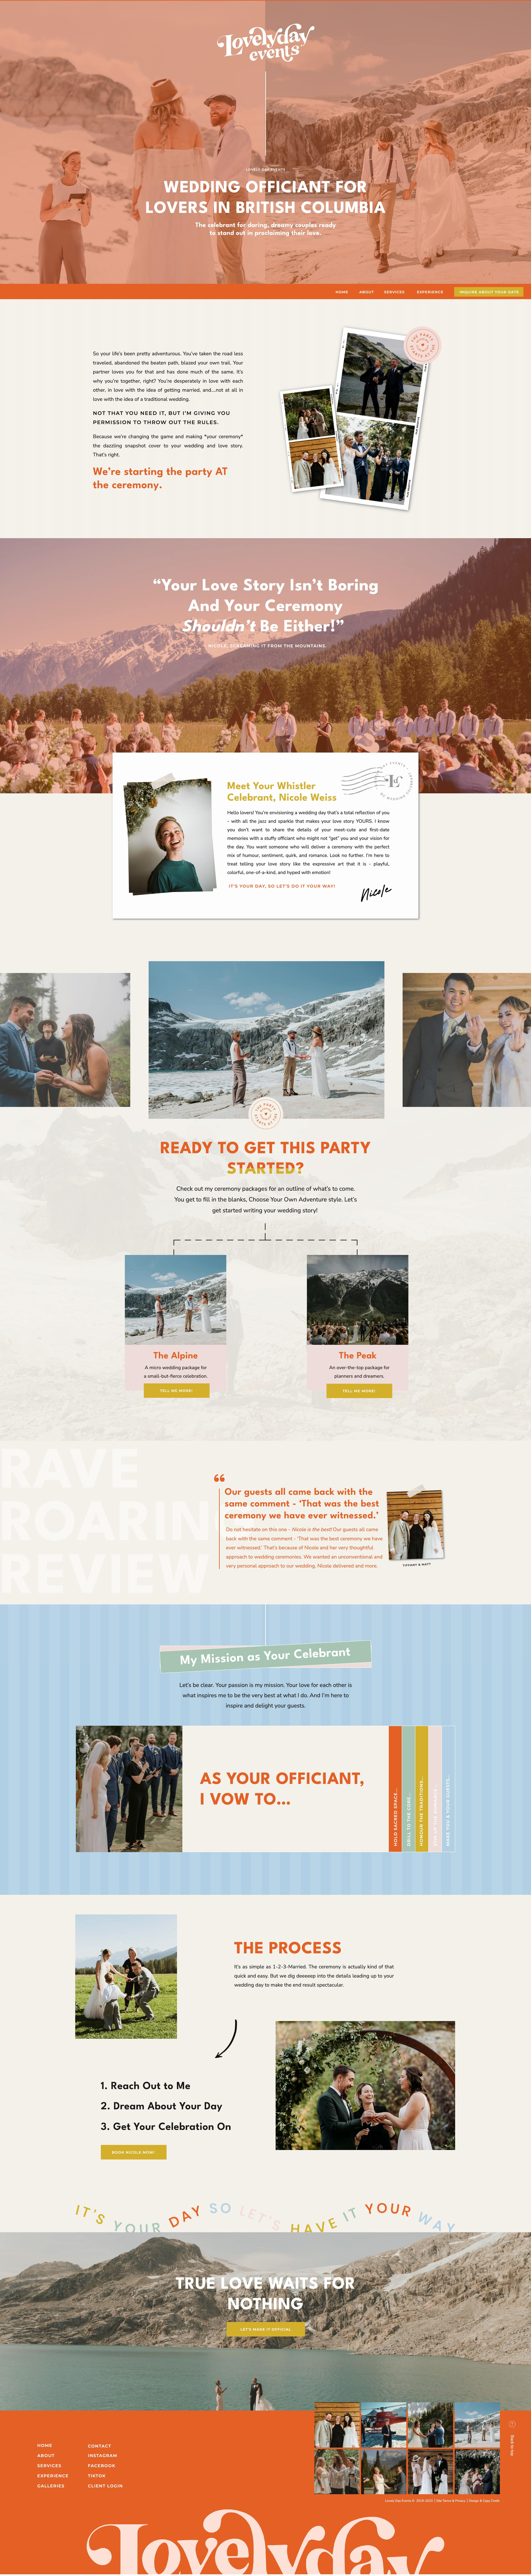 fun and colorful website mockup for wedding officiant